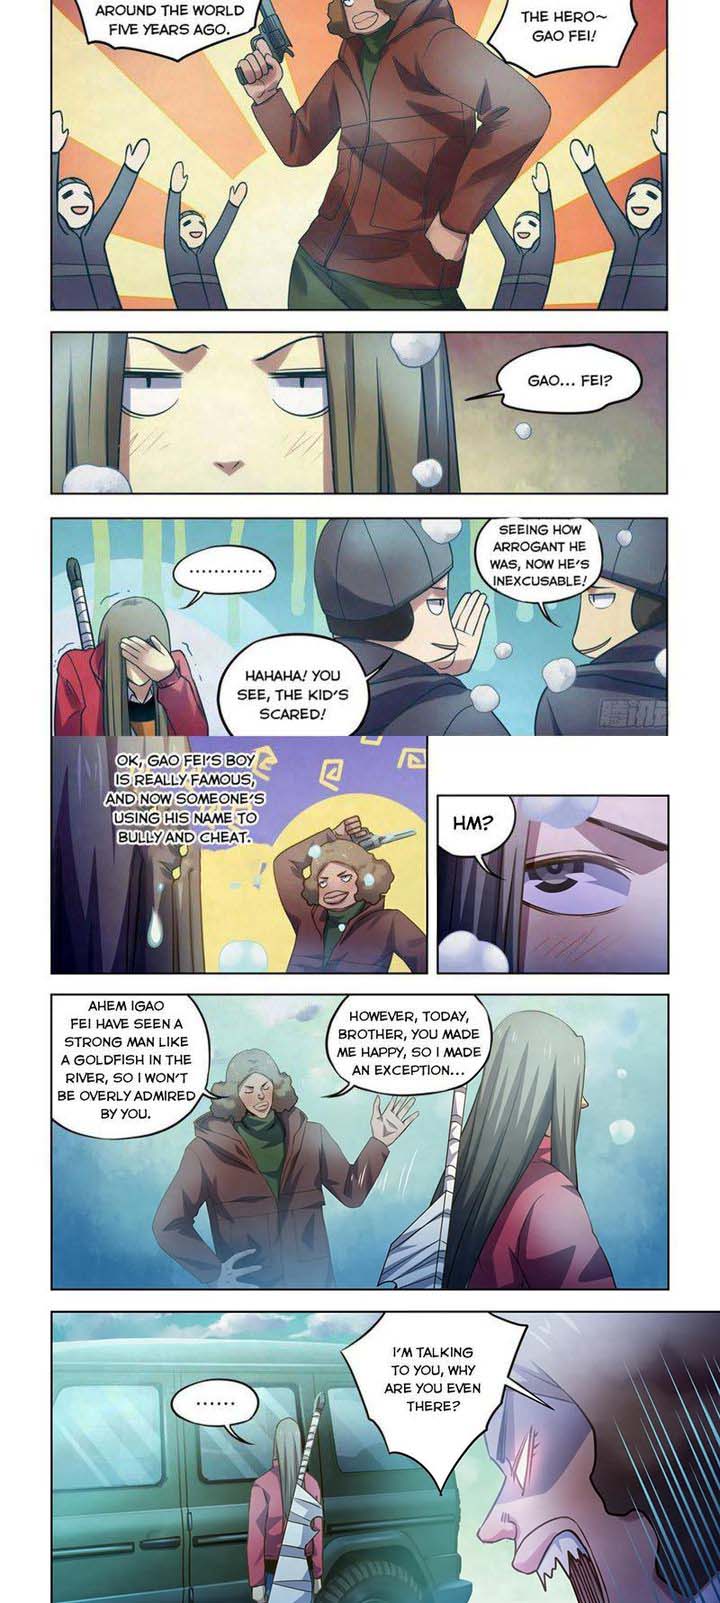 The Last Human Chapter 323 Page 4